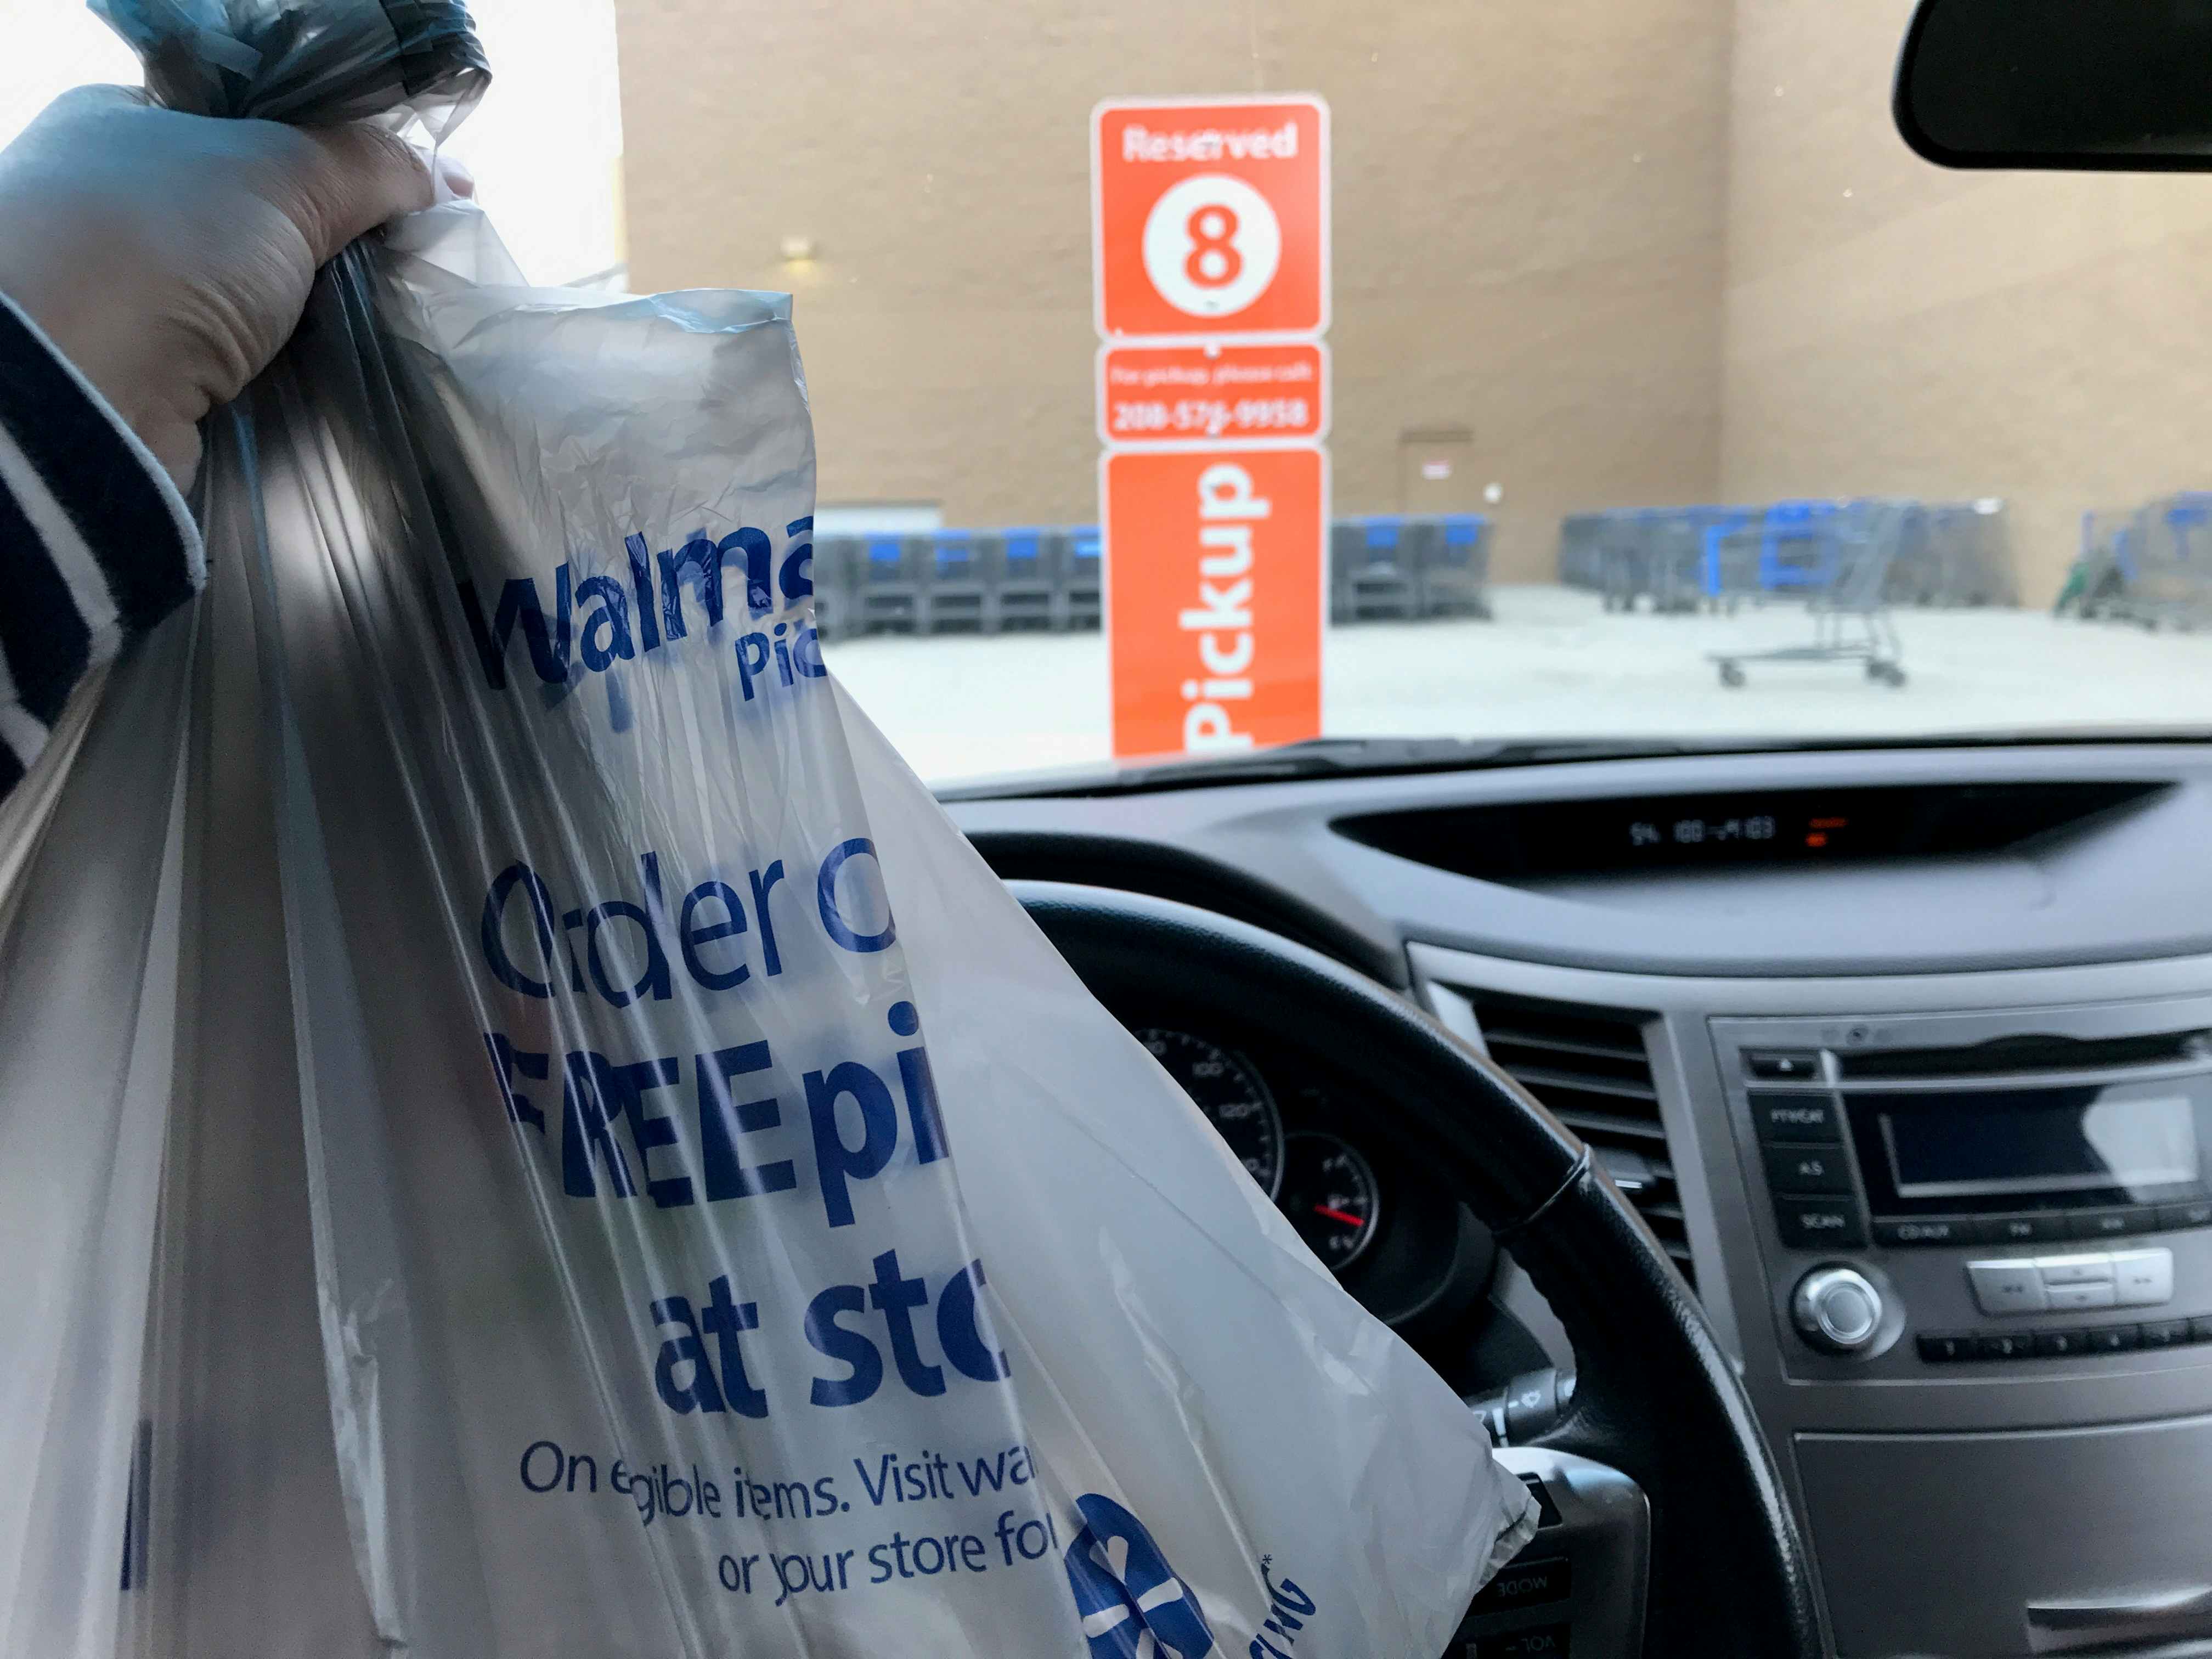 Free grocery pick-up at Walmart